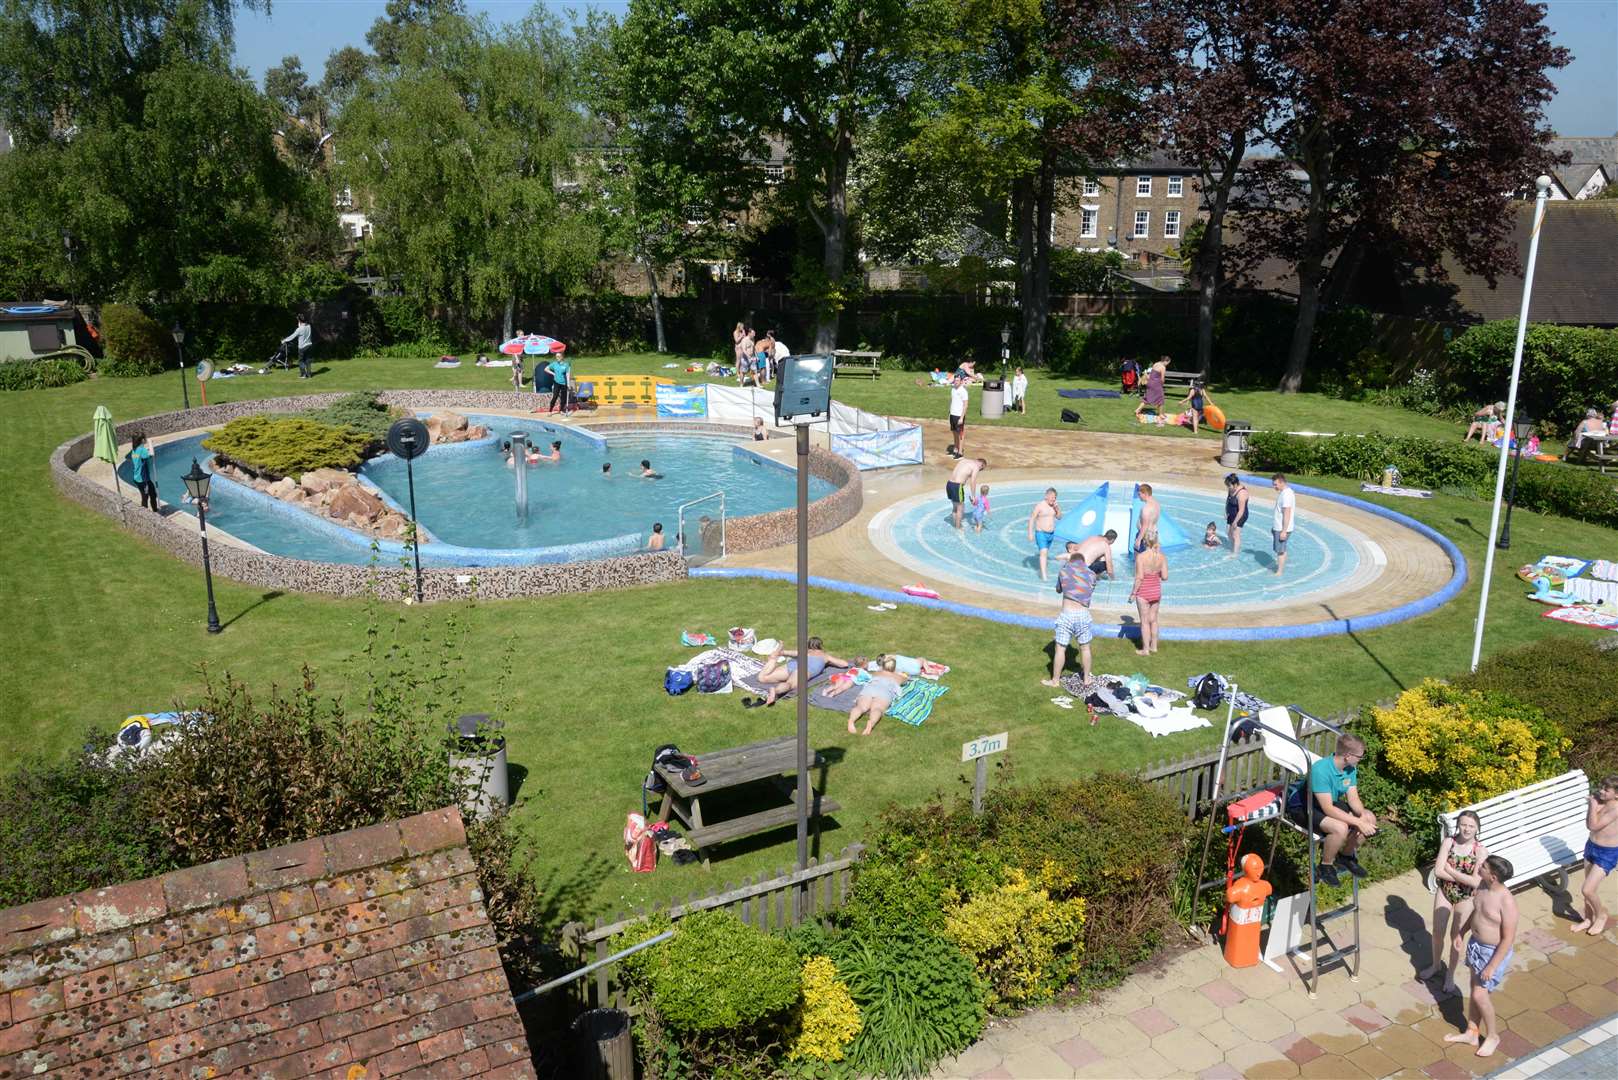 Faversham outdoor pool has not reopened this summer